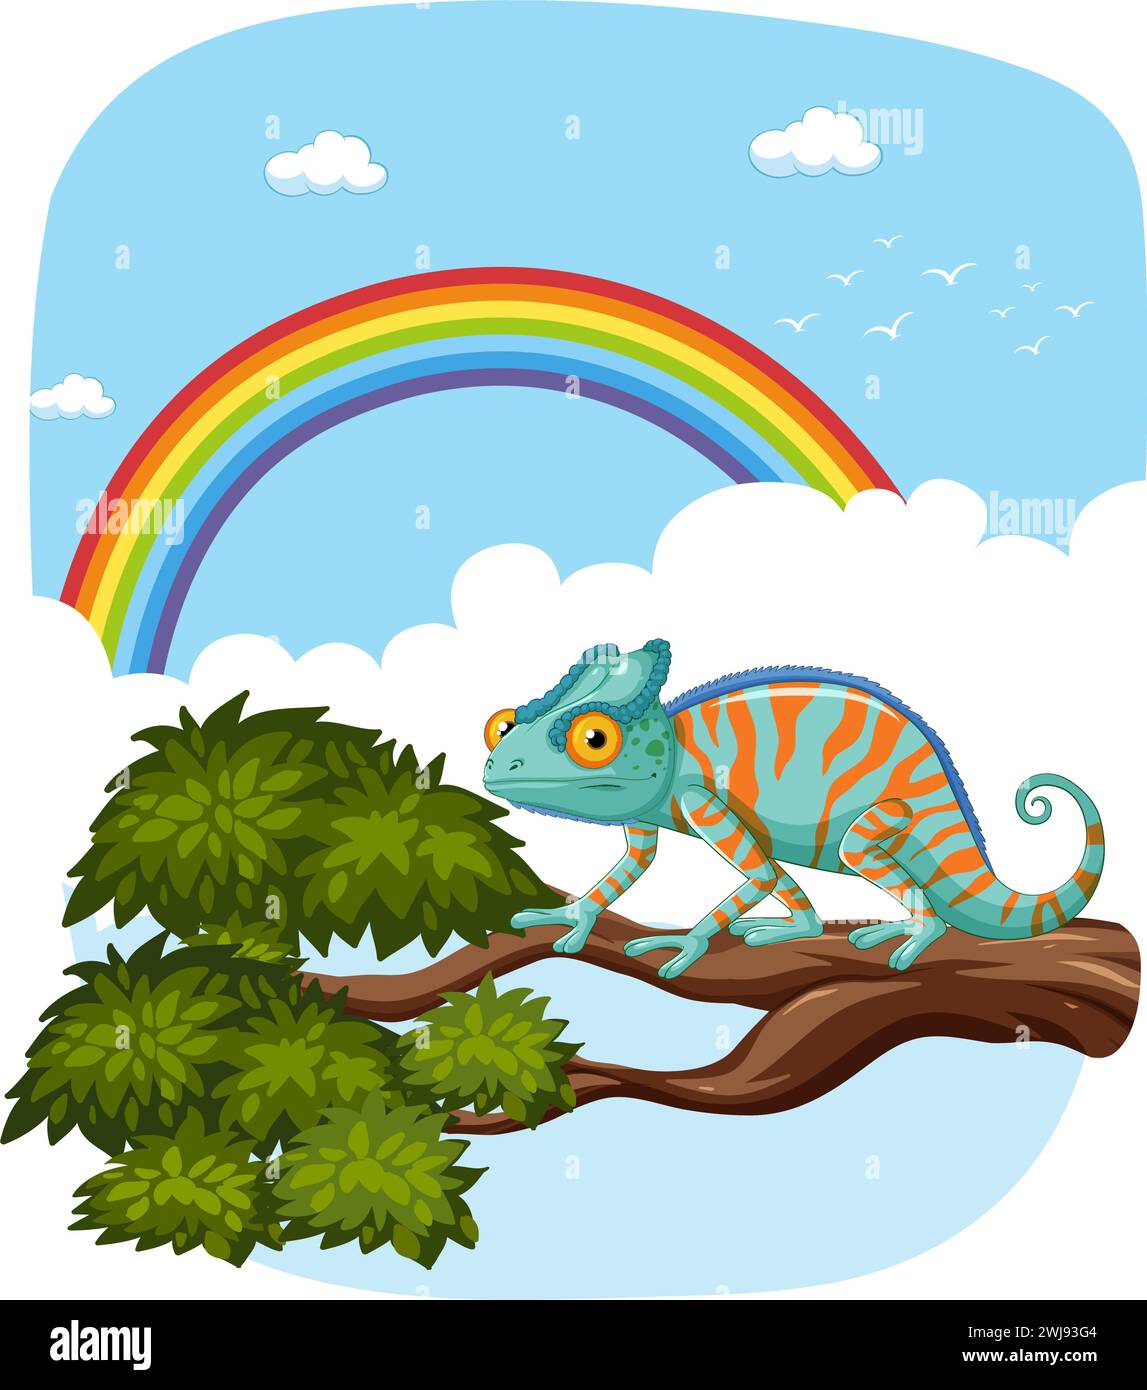 Colorful chameleon on a branch with rainbow Stock Vector